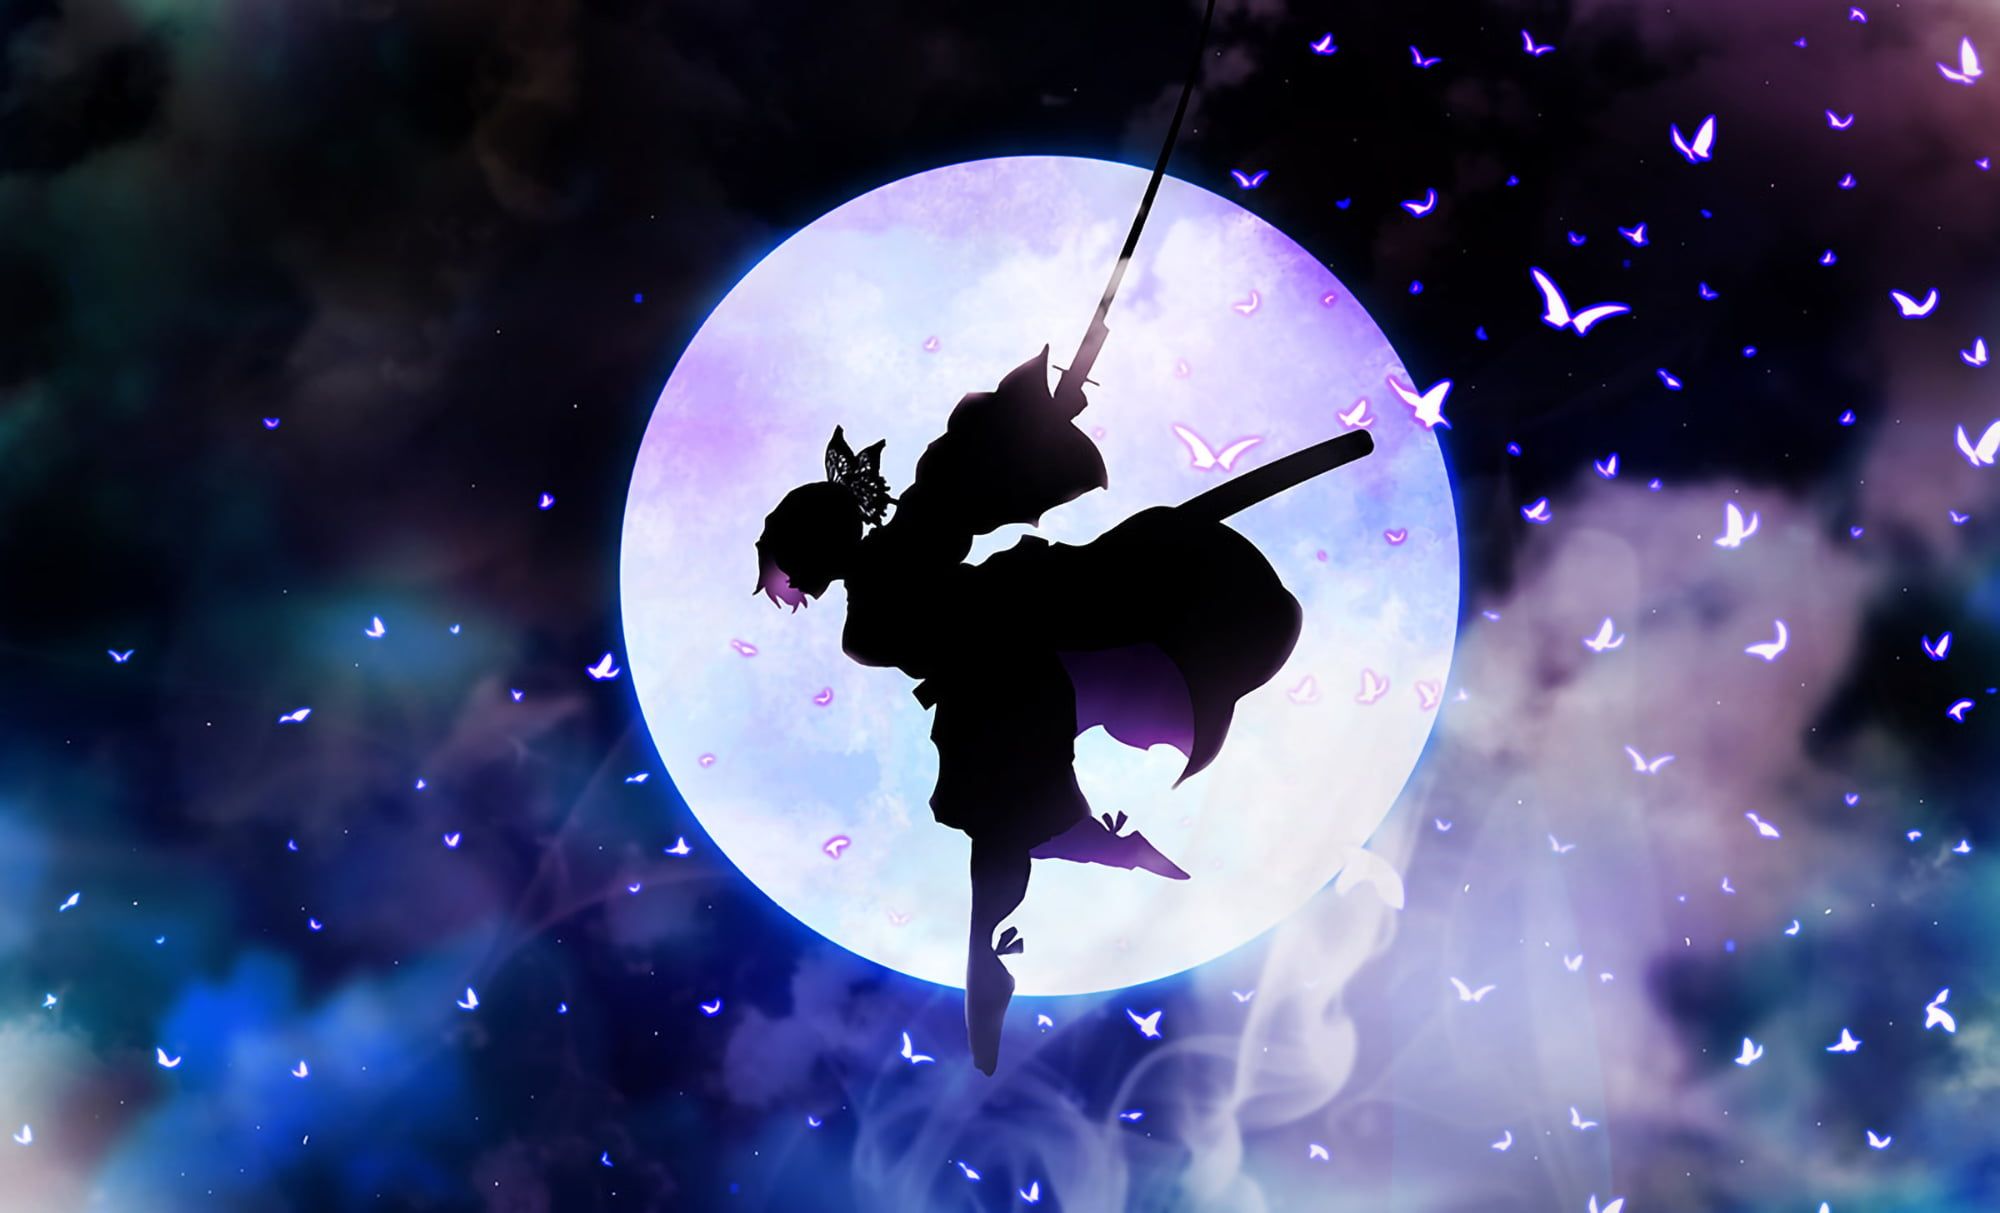 Anime girl with a sword in the night sky - Demon Slayer